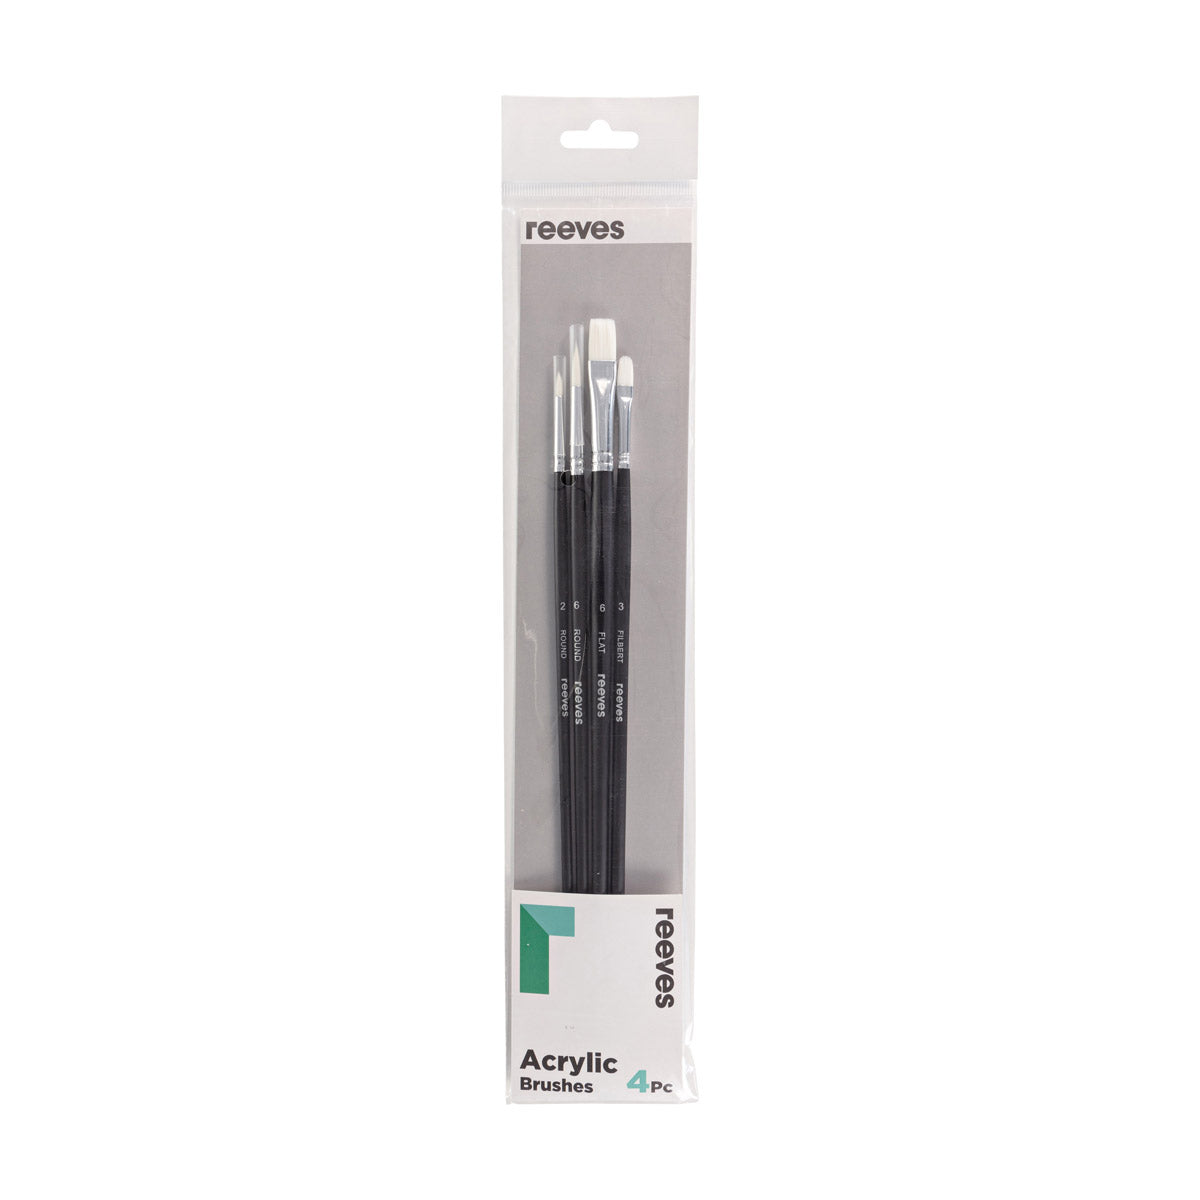 Reeves - Acrylpinsel -Set - langer Griff - 4x Pinselpack